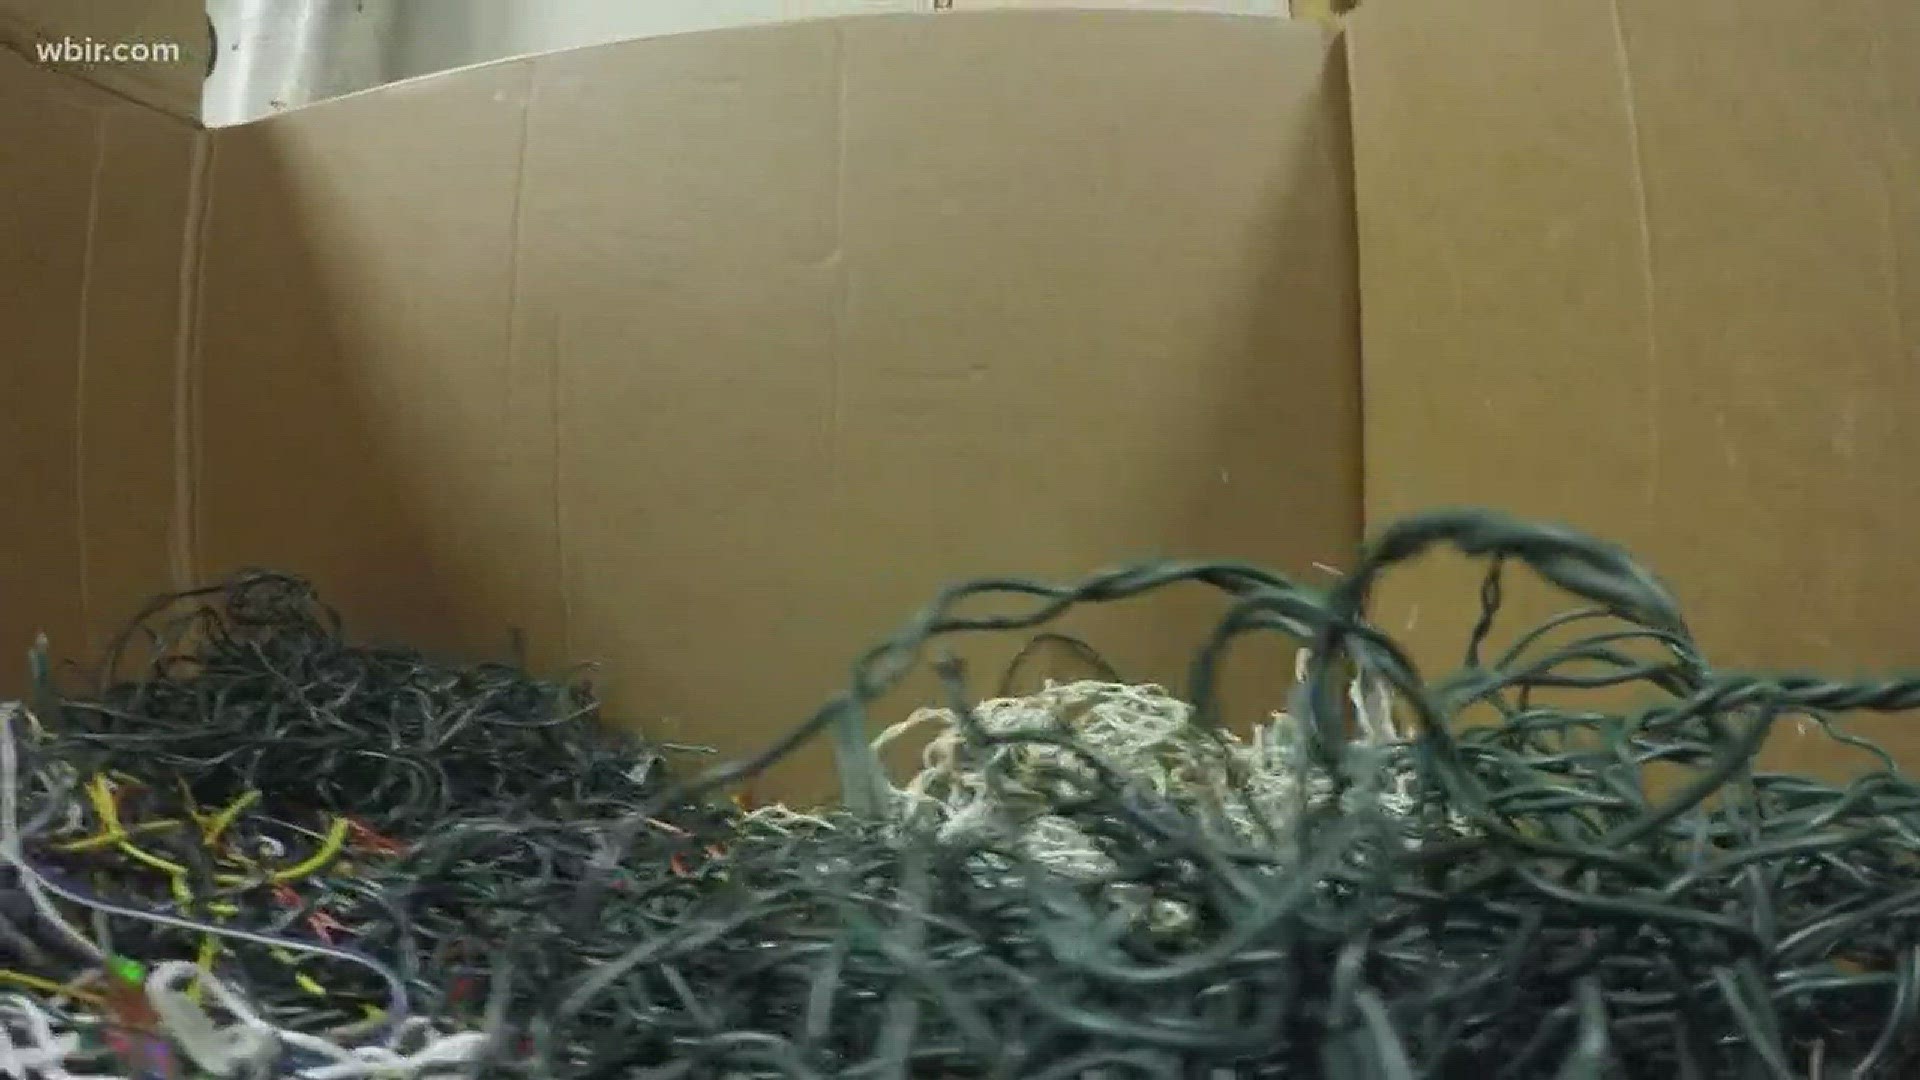 There are several locations around Knox County you can donate old or broken Christmas lights to be recycled.